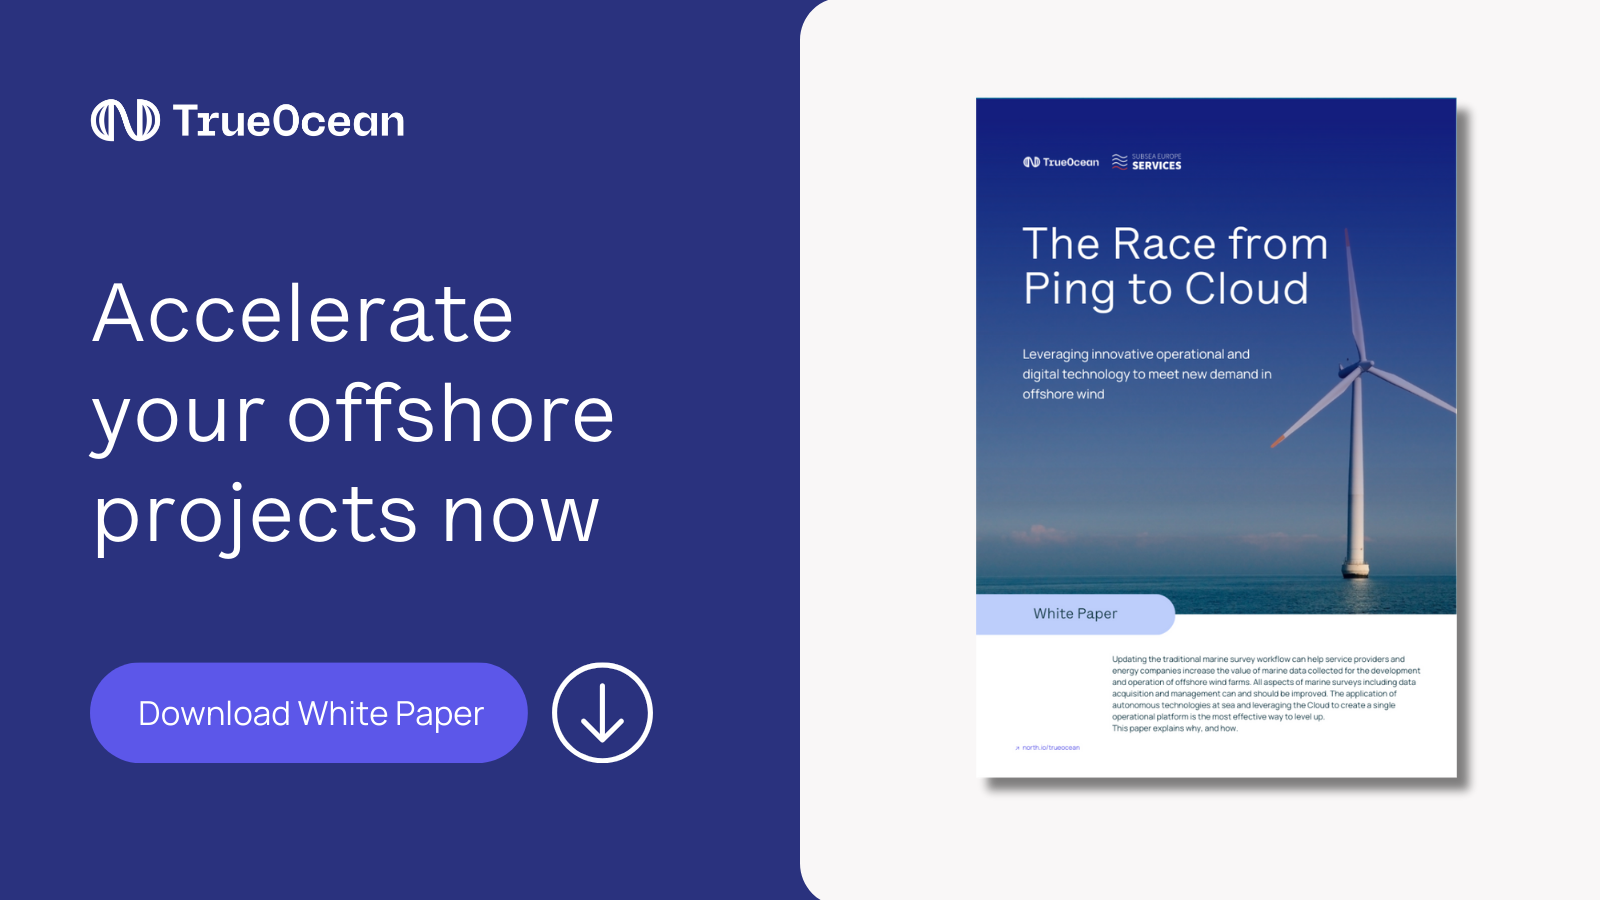 TrueOcean-Featured Image-Whitepaper The Race from Ping to Cloud